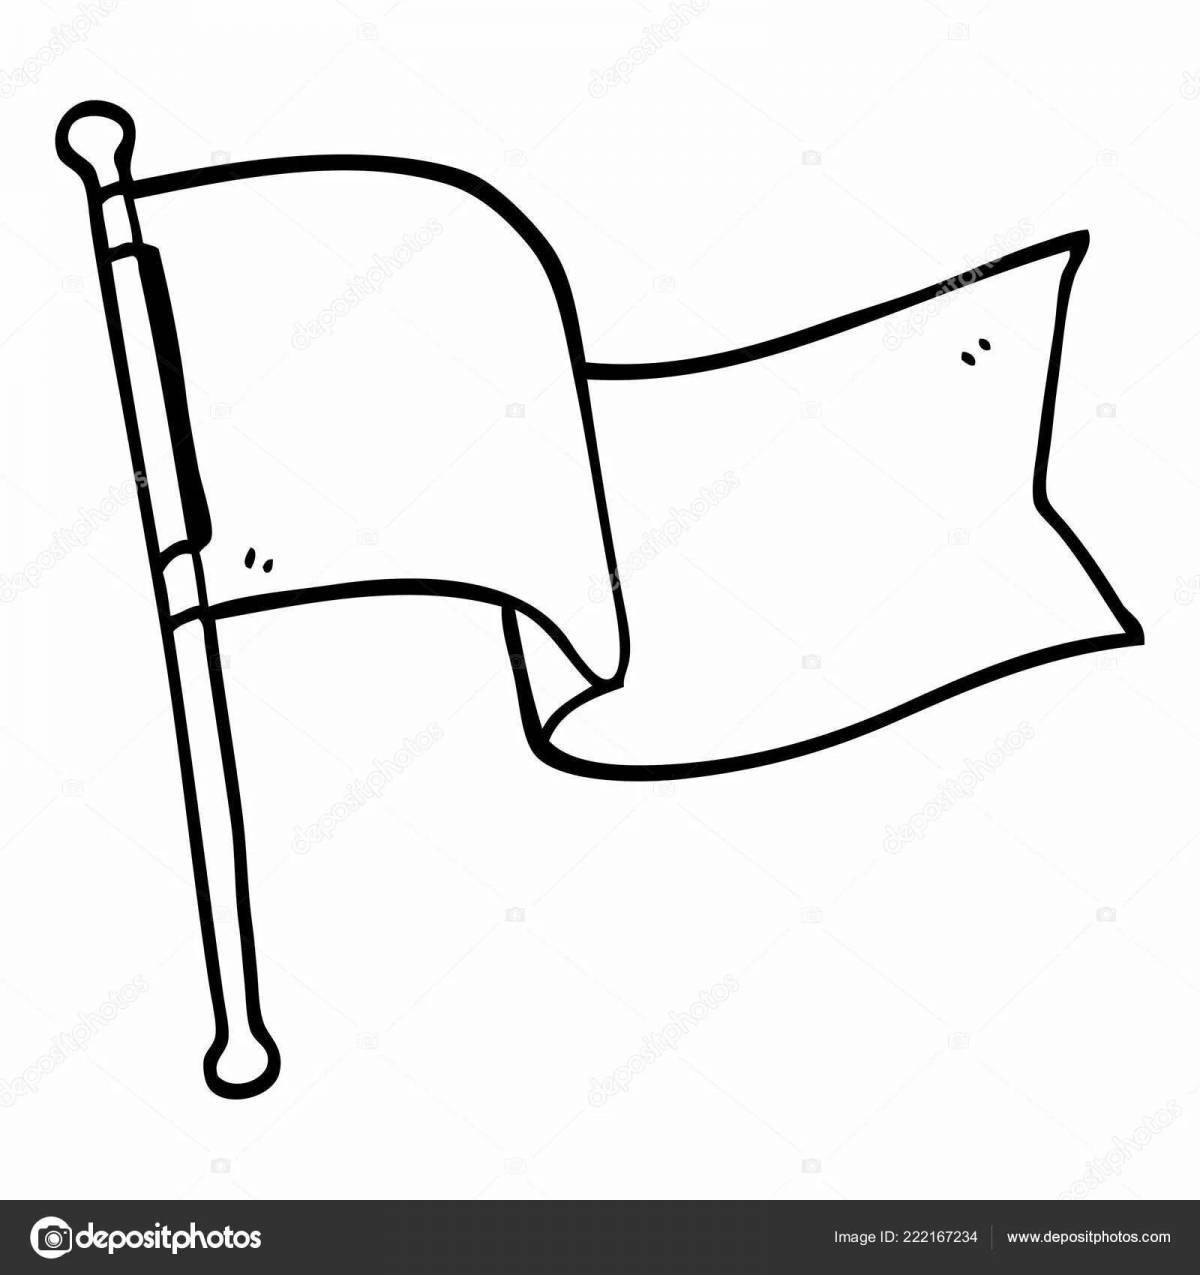 Attractive flag coloring for kids